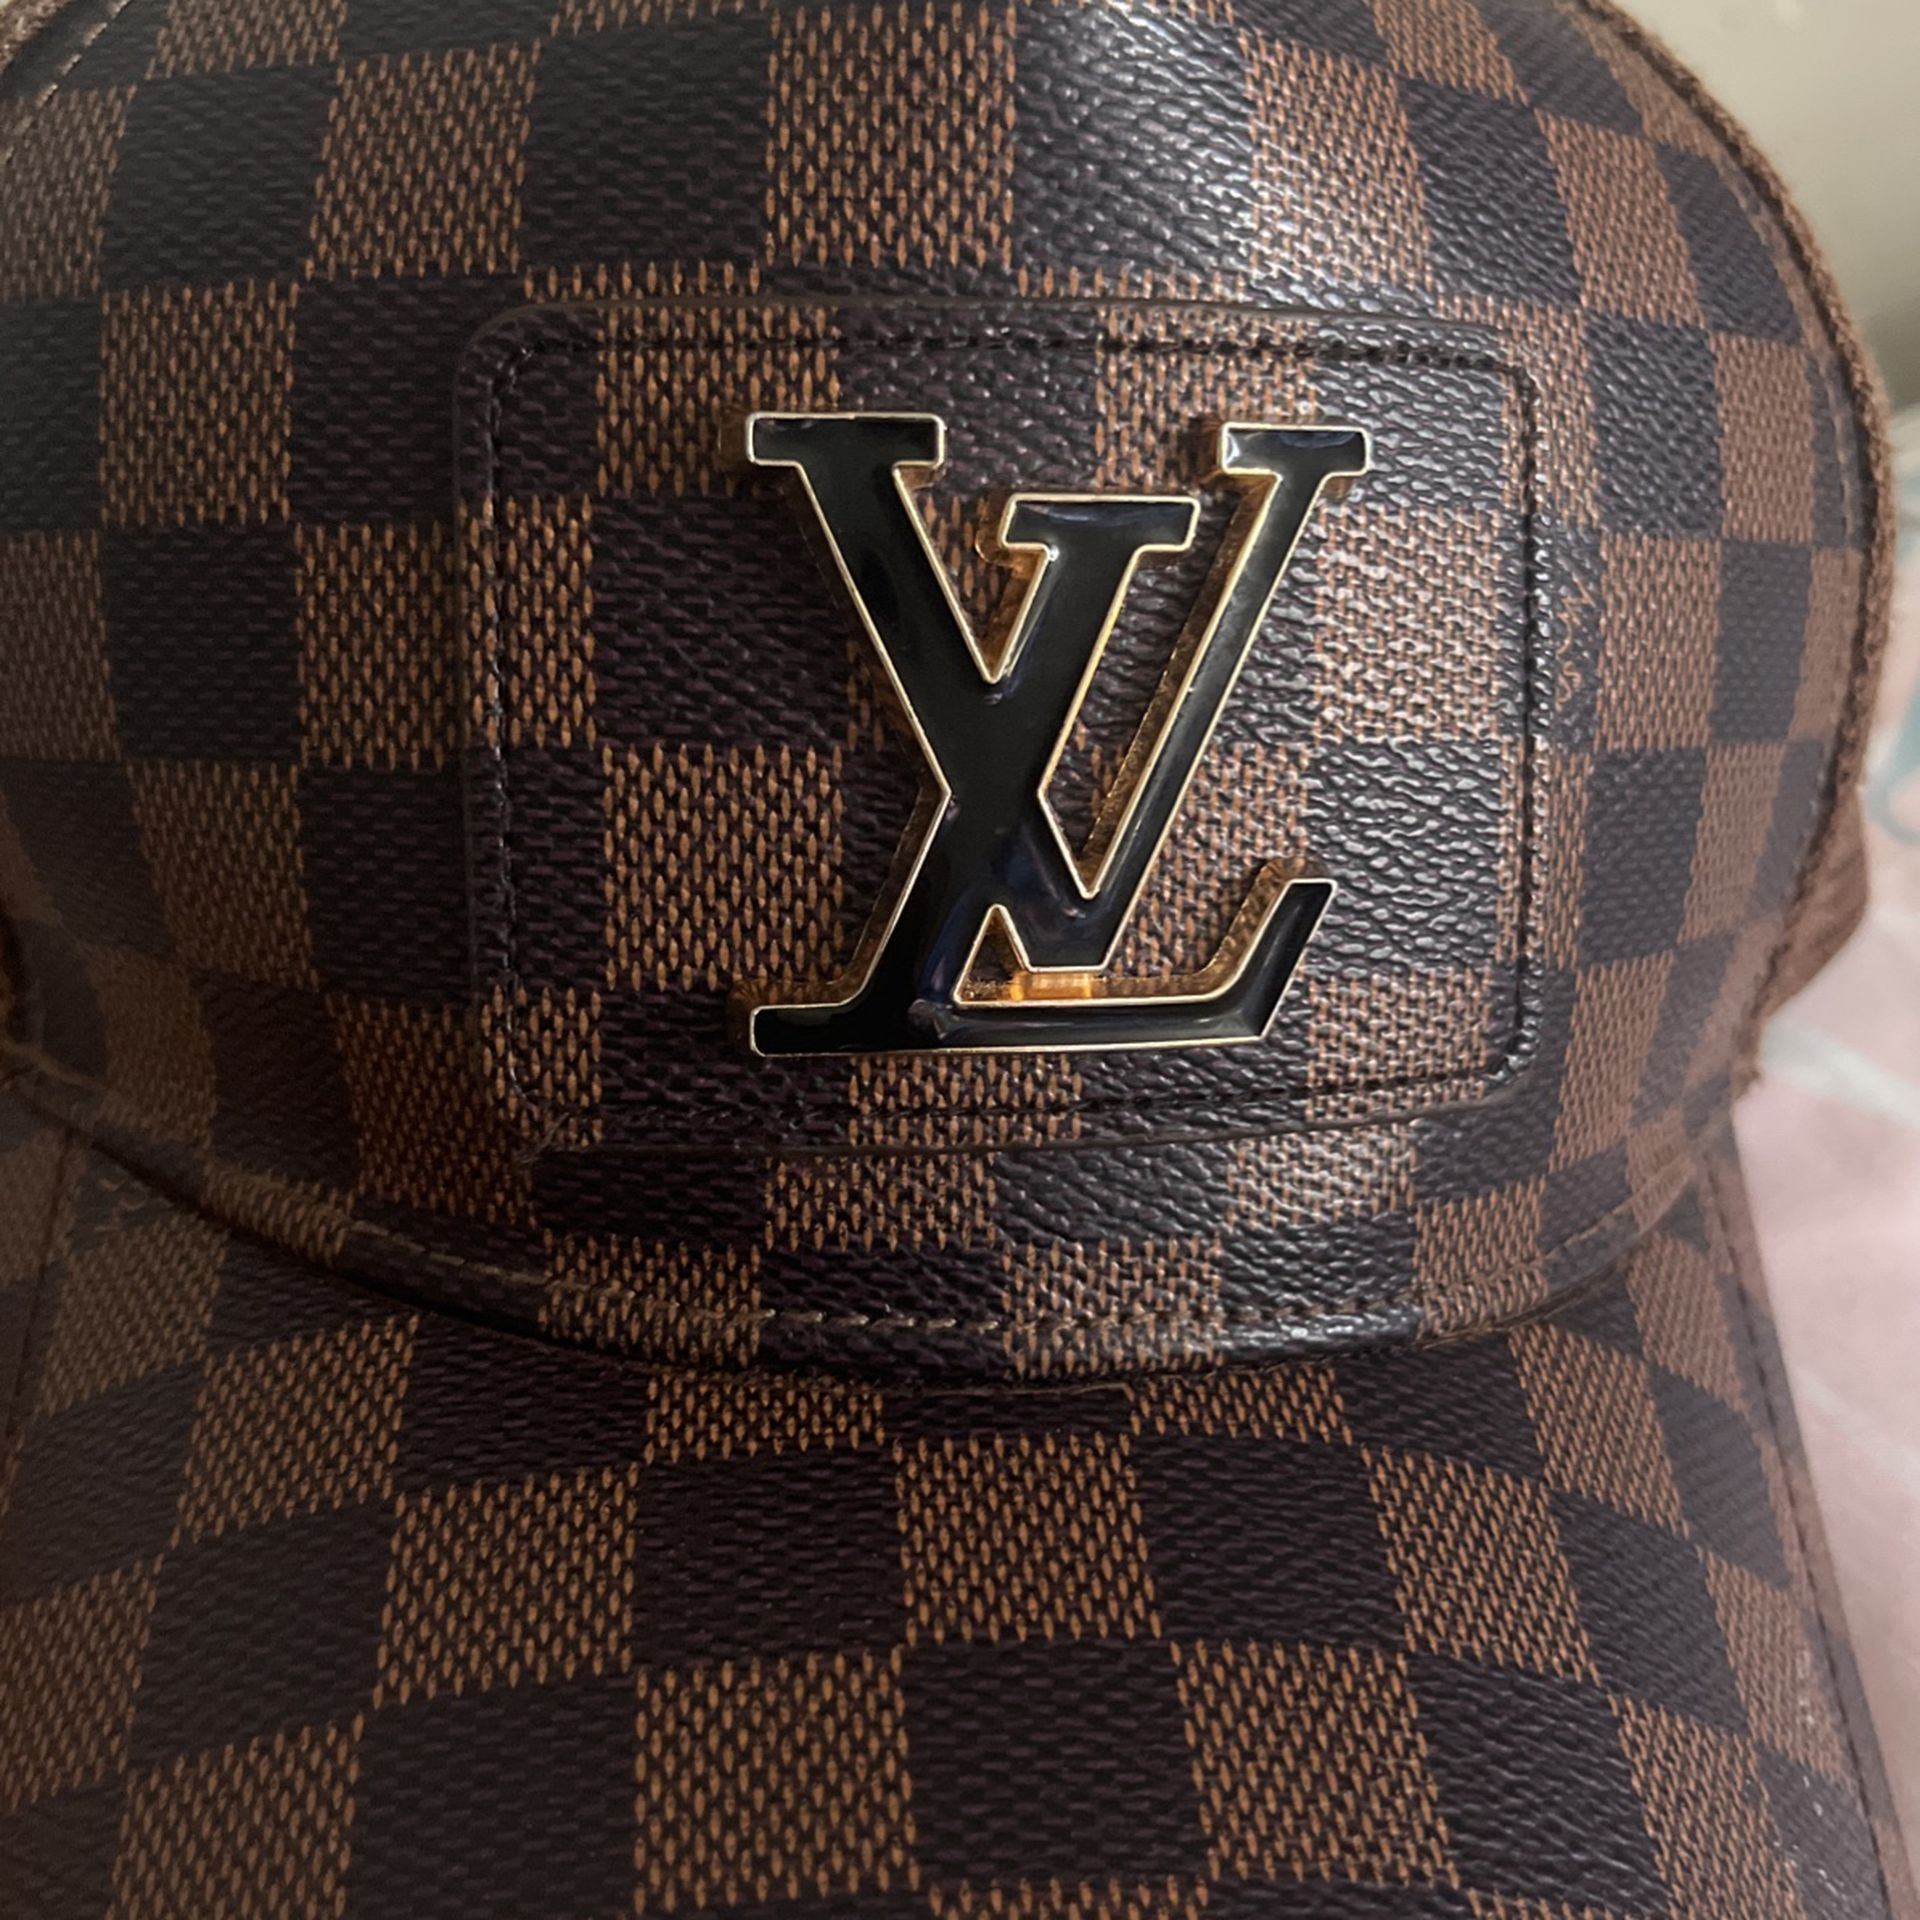 LV Baseball Hats for Sale in New York, NY - OfferUp